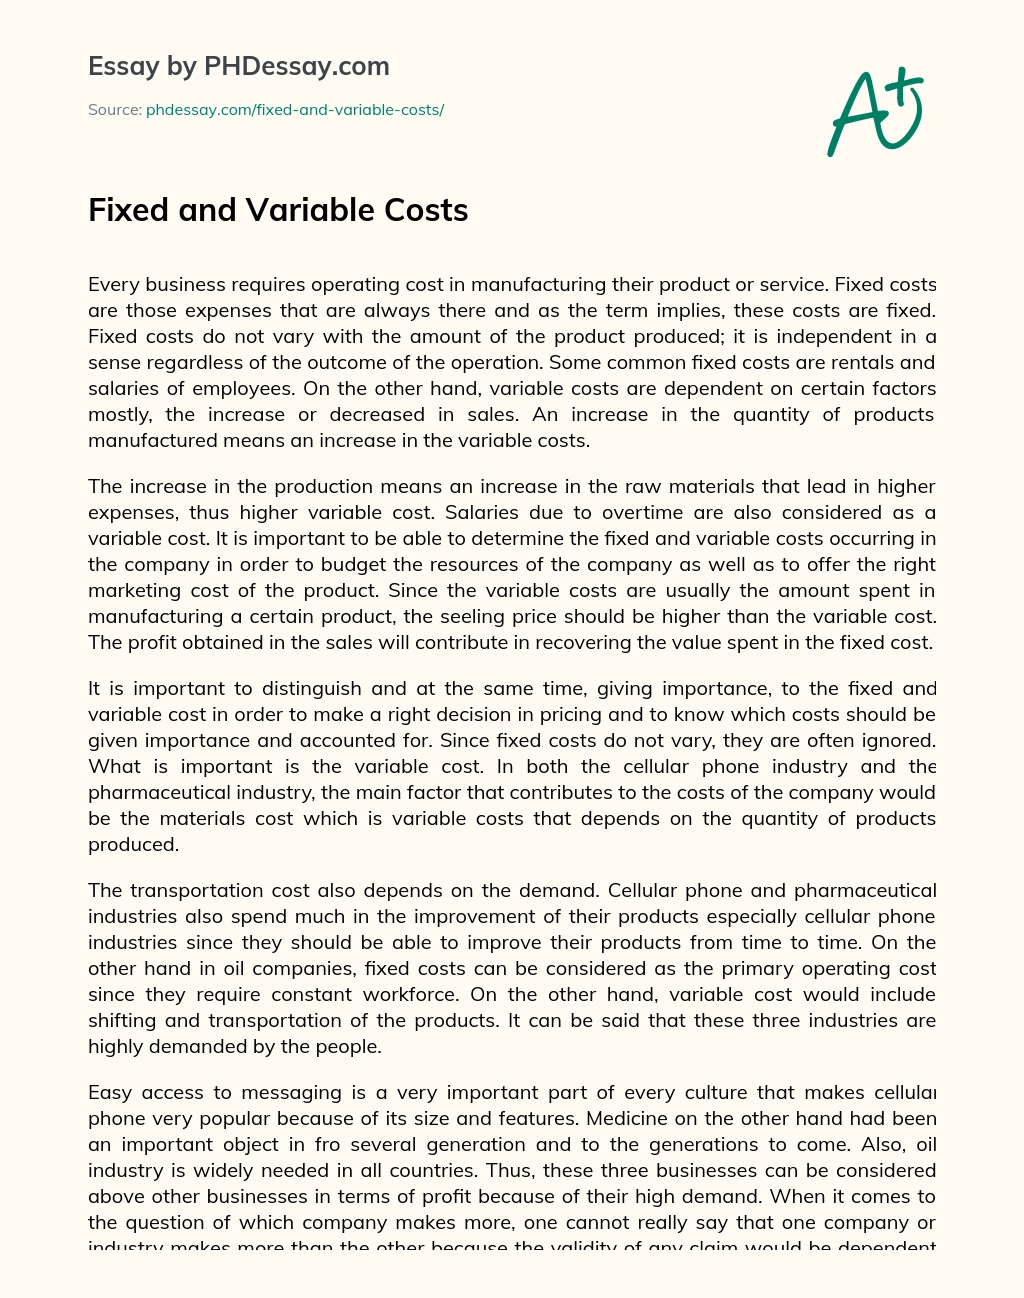 Fixed and Variable Costs essay